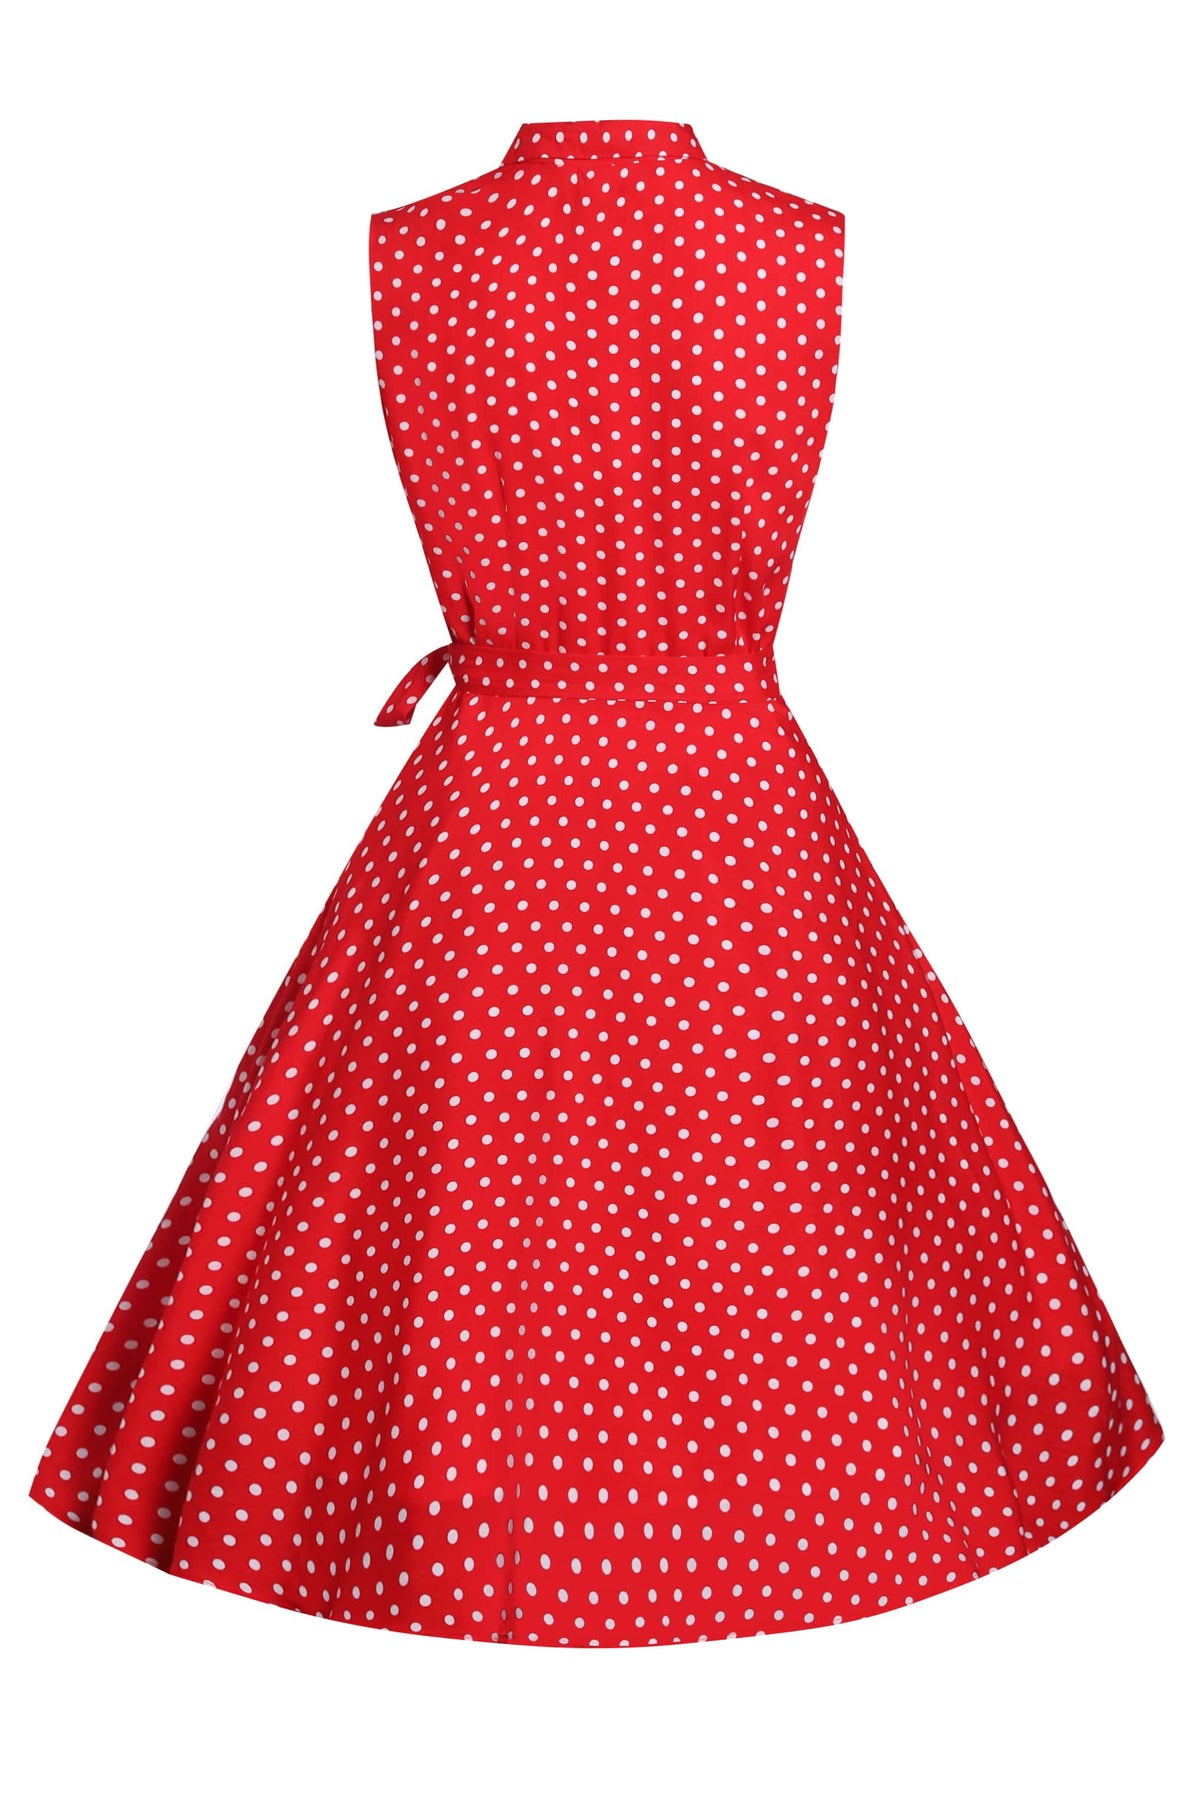 Poppy Red Polka Dot Button Shirt Dress - Dolly and Dotty